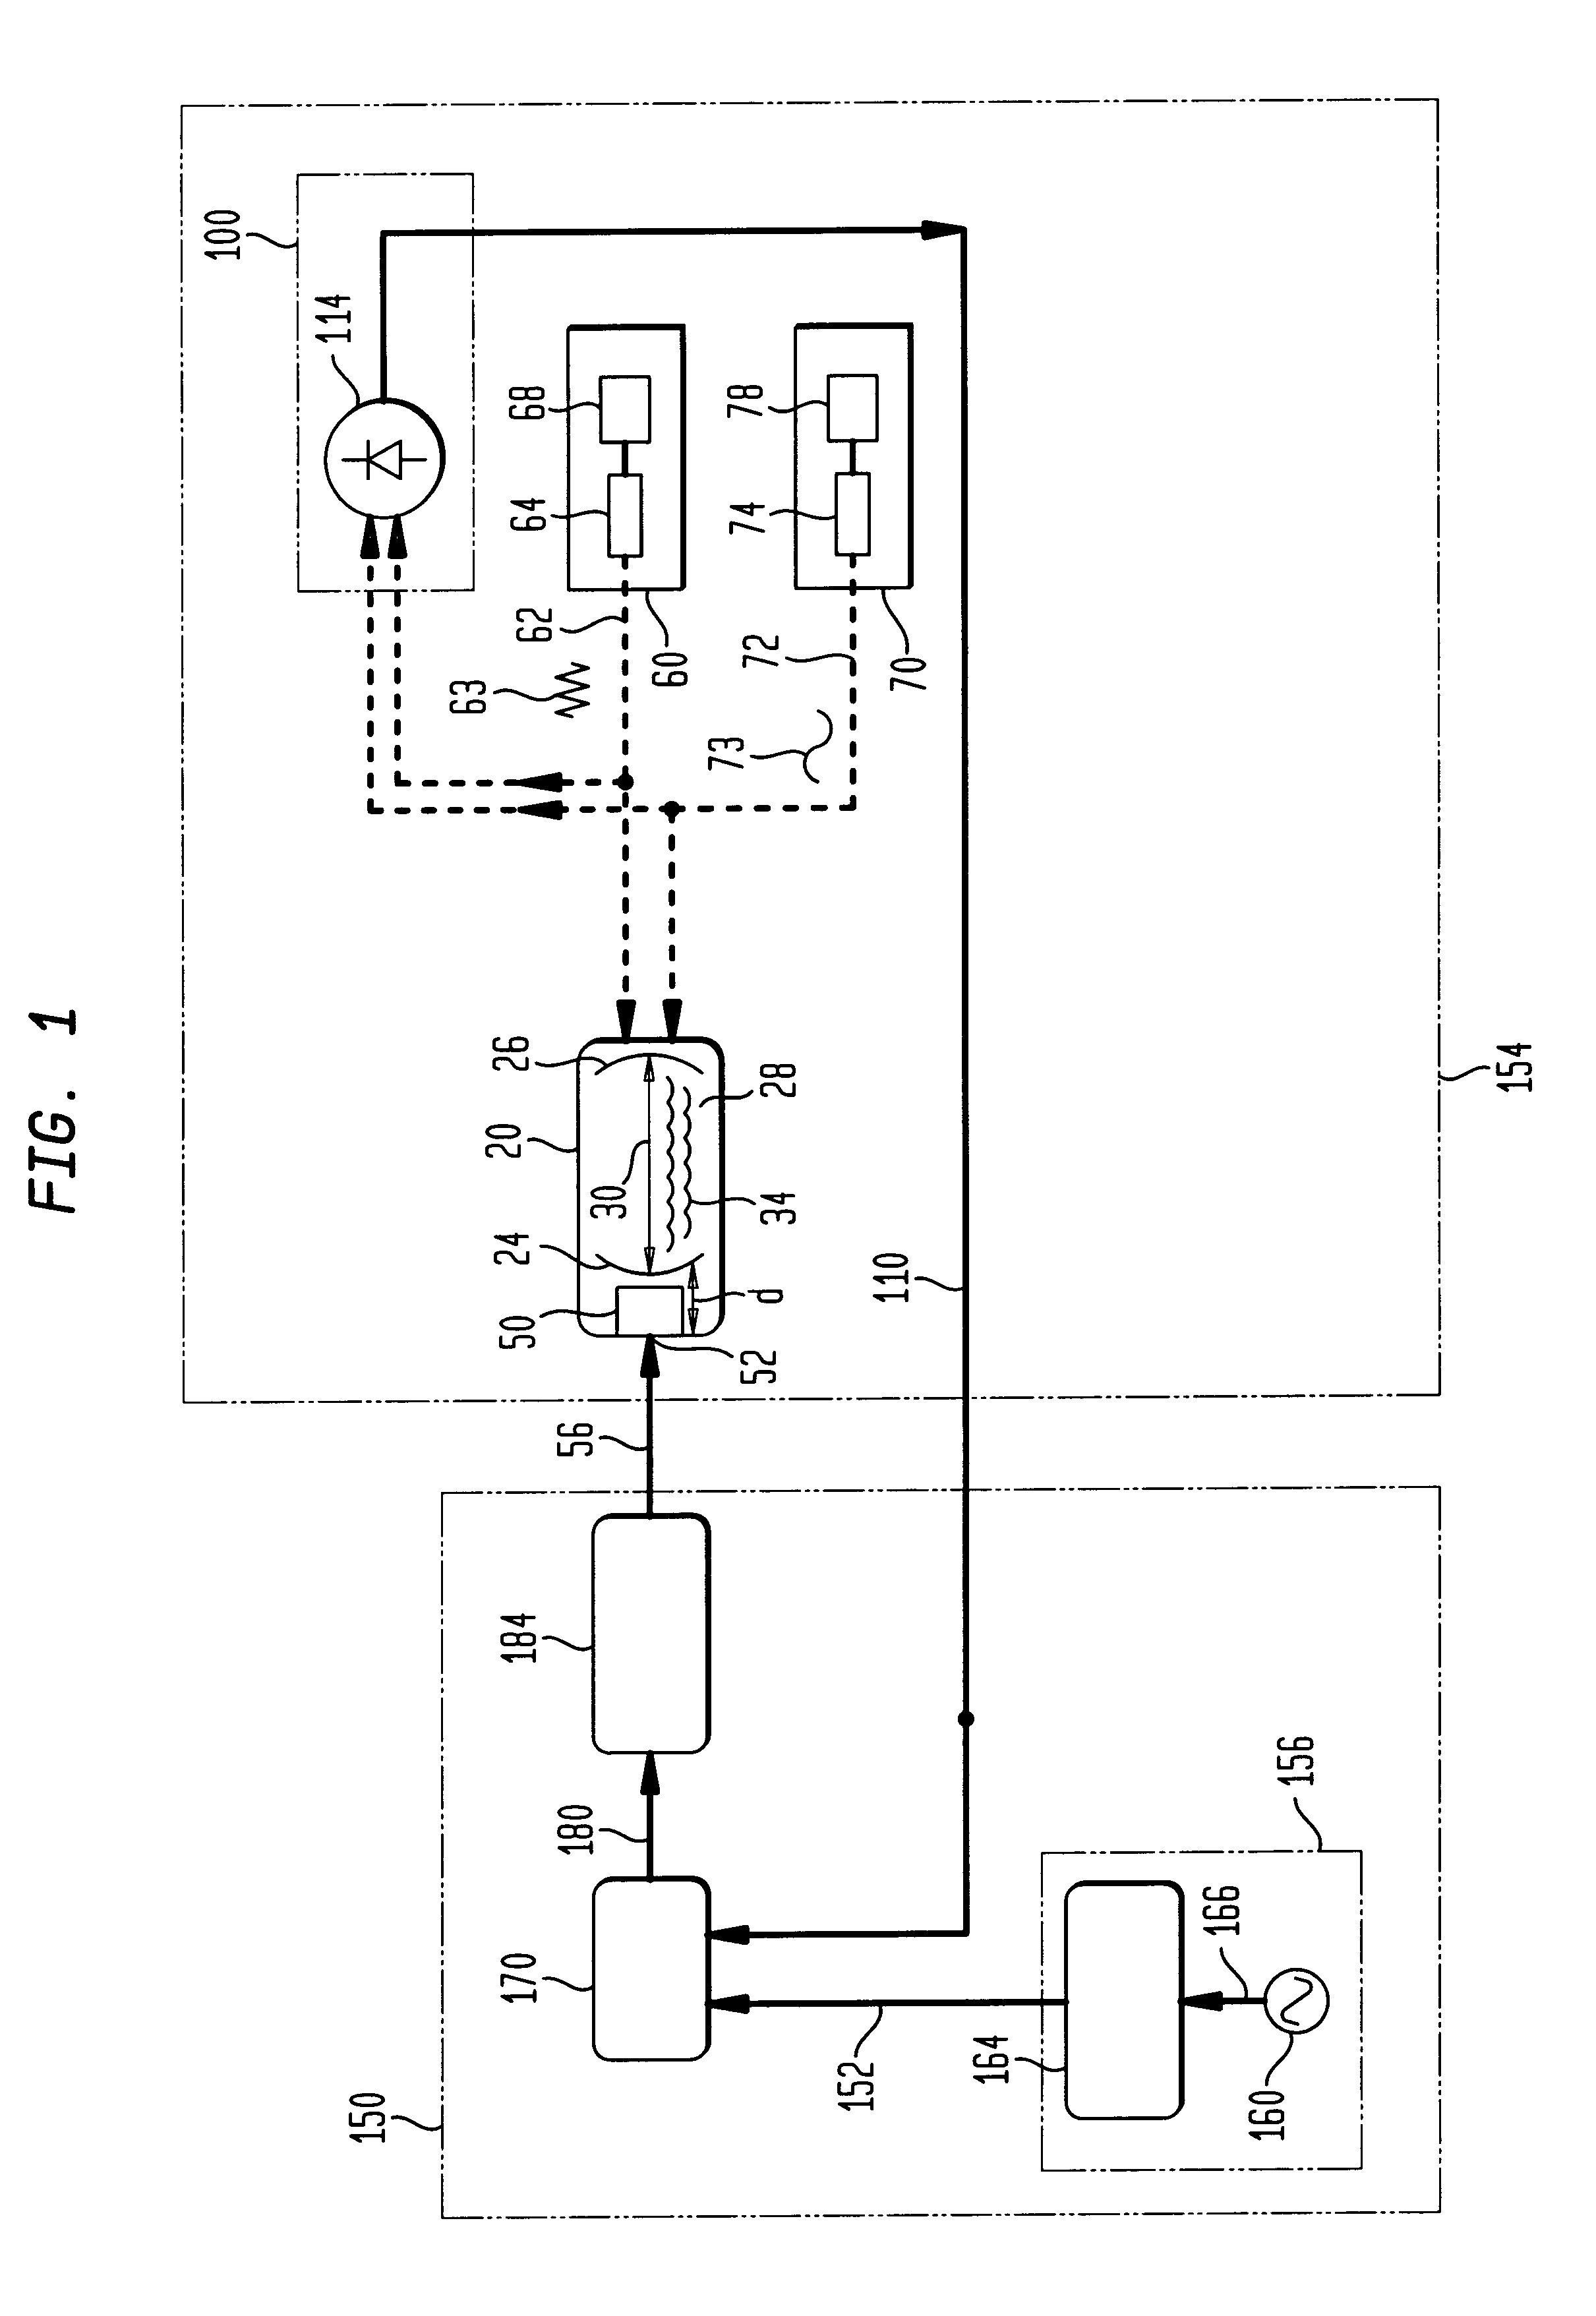 Apparatus and method for laser frequency control